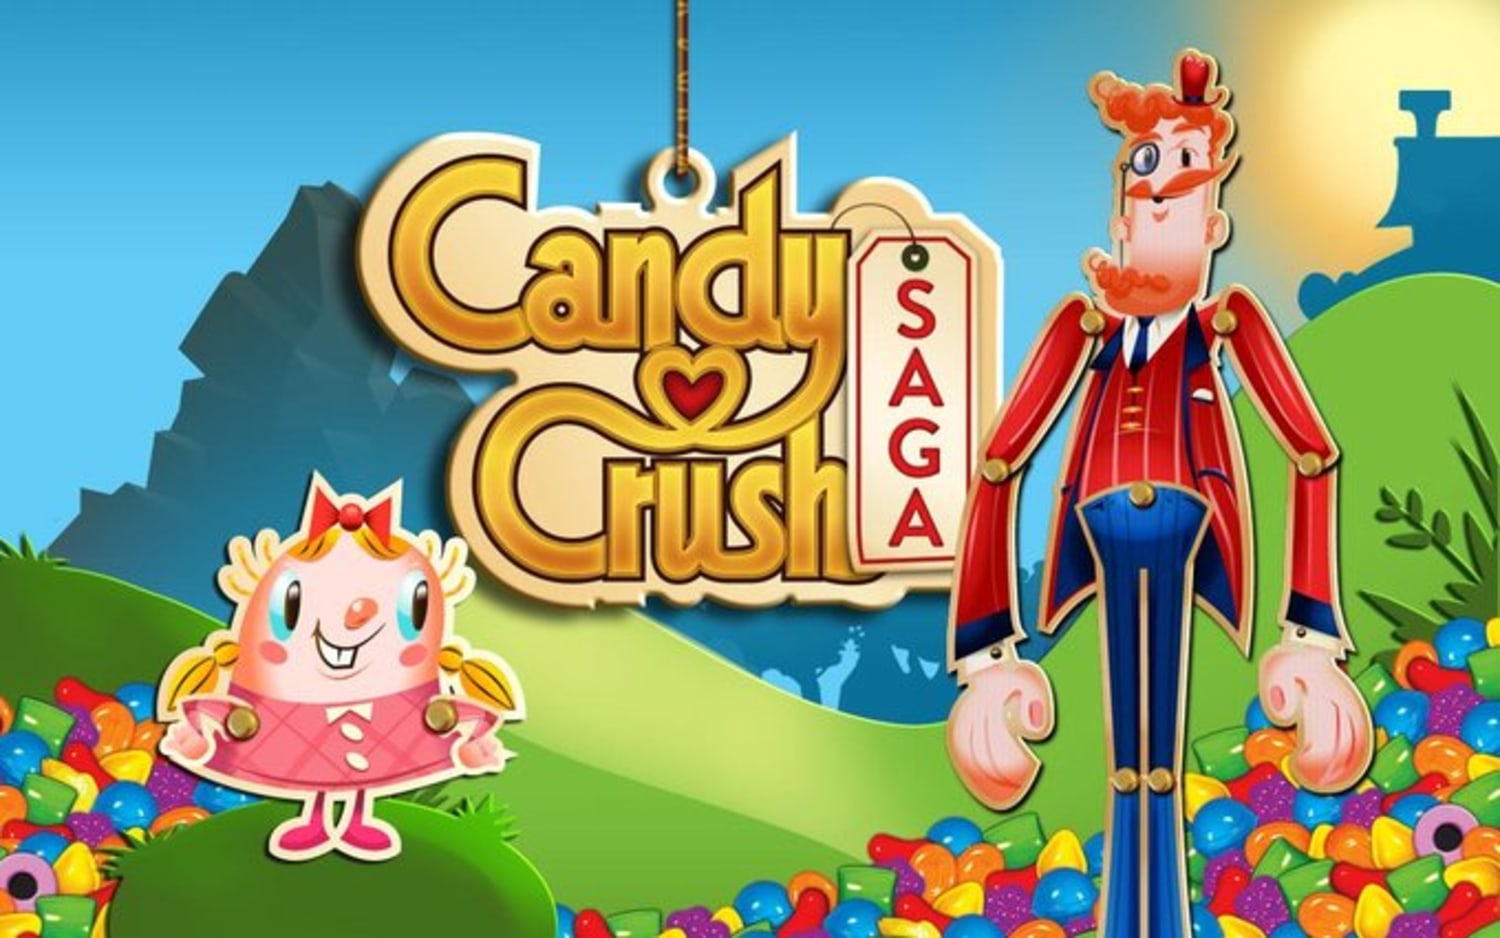 Sweet Sugar Candy for Nintendo Switch - Nintendo Official Site